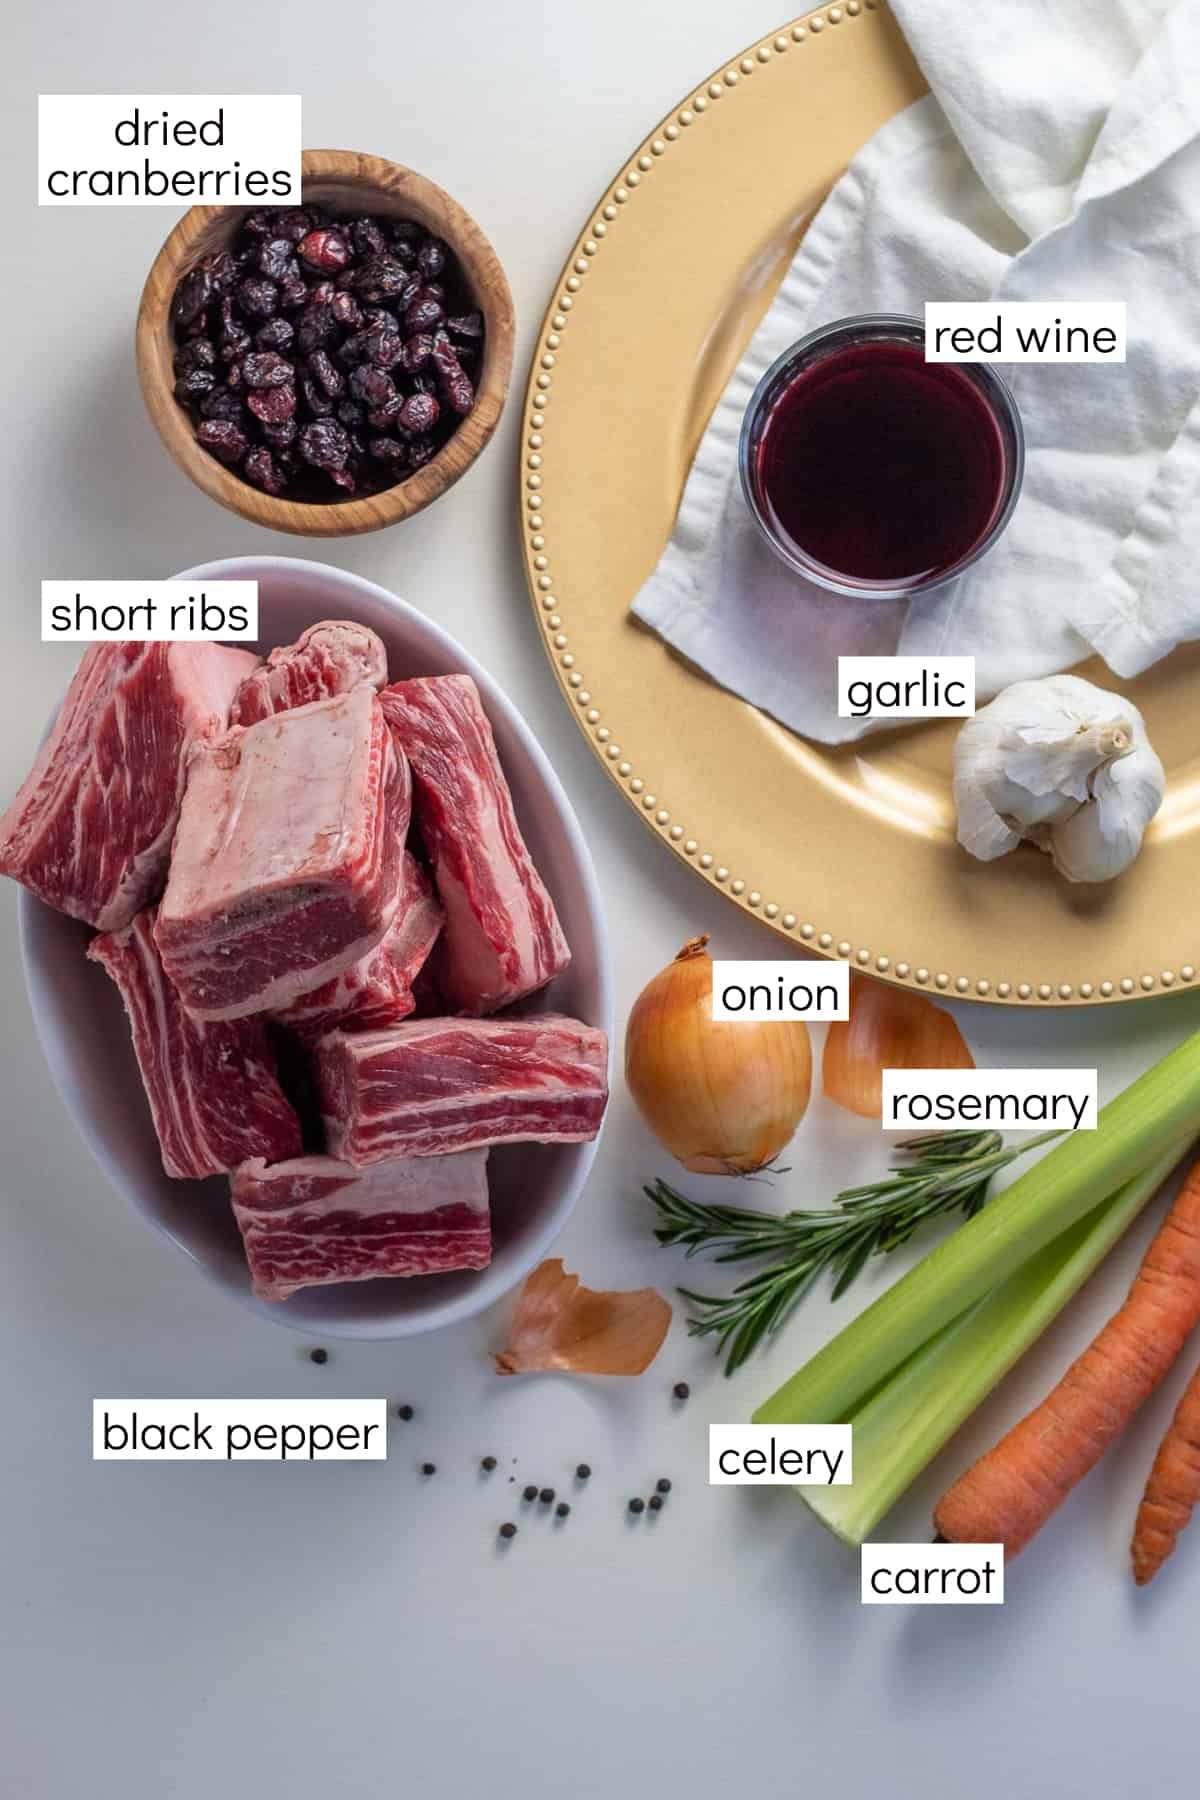 Ingredients for the recipe are displayed on a white surface with labels in white boxes, including: dried cranberries, red wine, short ribs, garlic, onion, rosemary, black pepper, celery, and carrot.